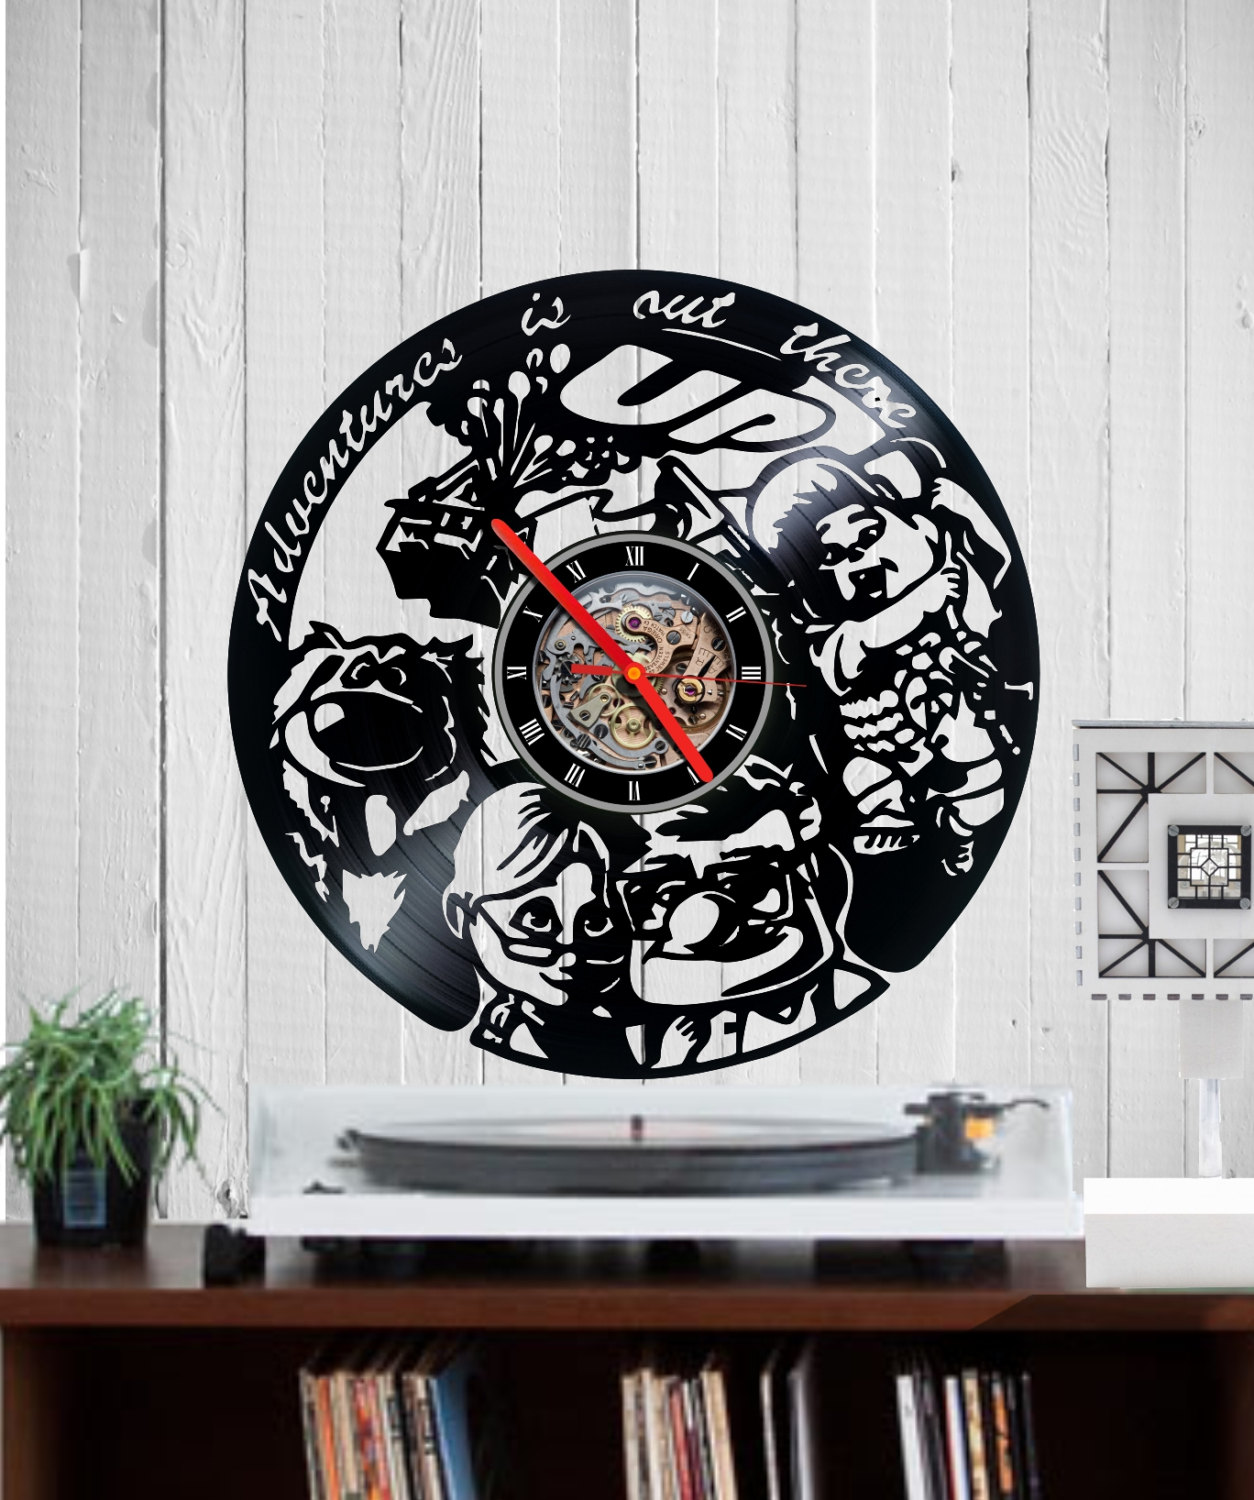 Doctor Who TV series Yellow Led Light Vinyl Record Wall Clock Gift Ideas for Boys and Girls Perfect Element of The Interior Unique Modern Art Get Unique Bedroom or livingroom Wall Decor